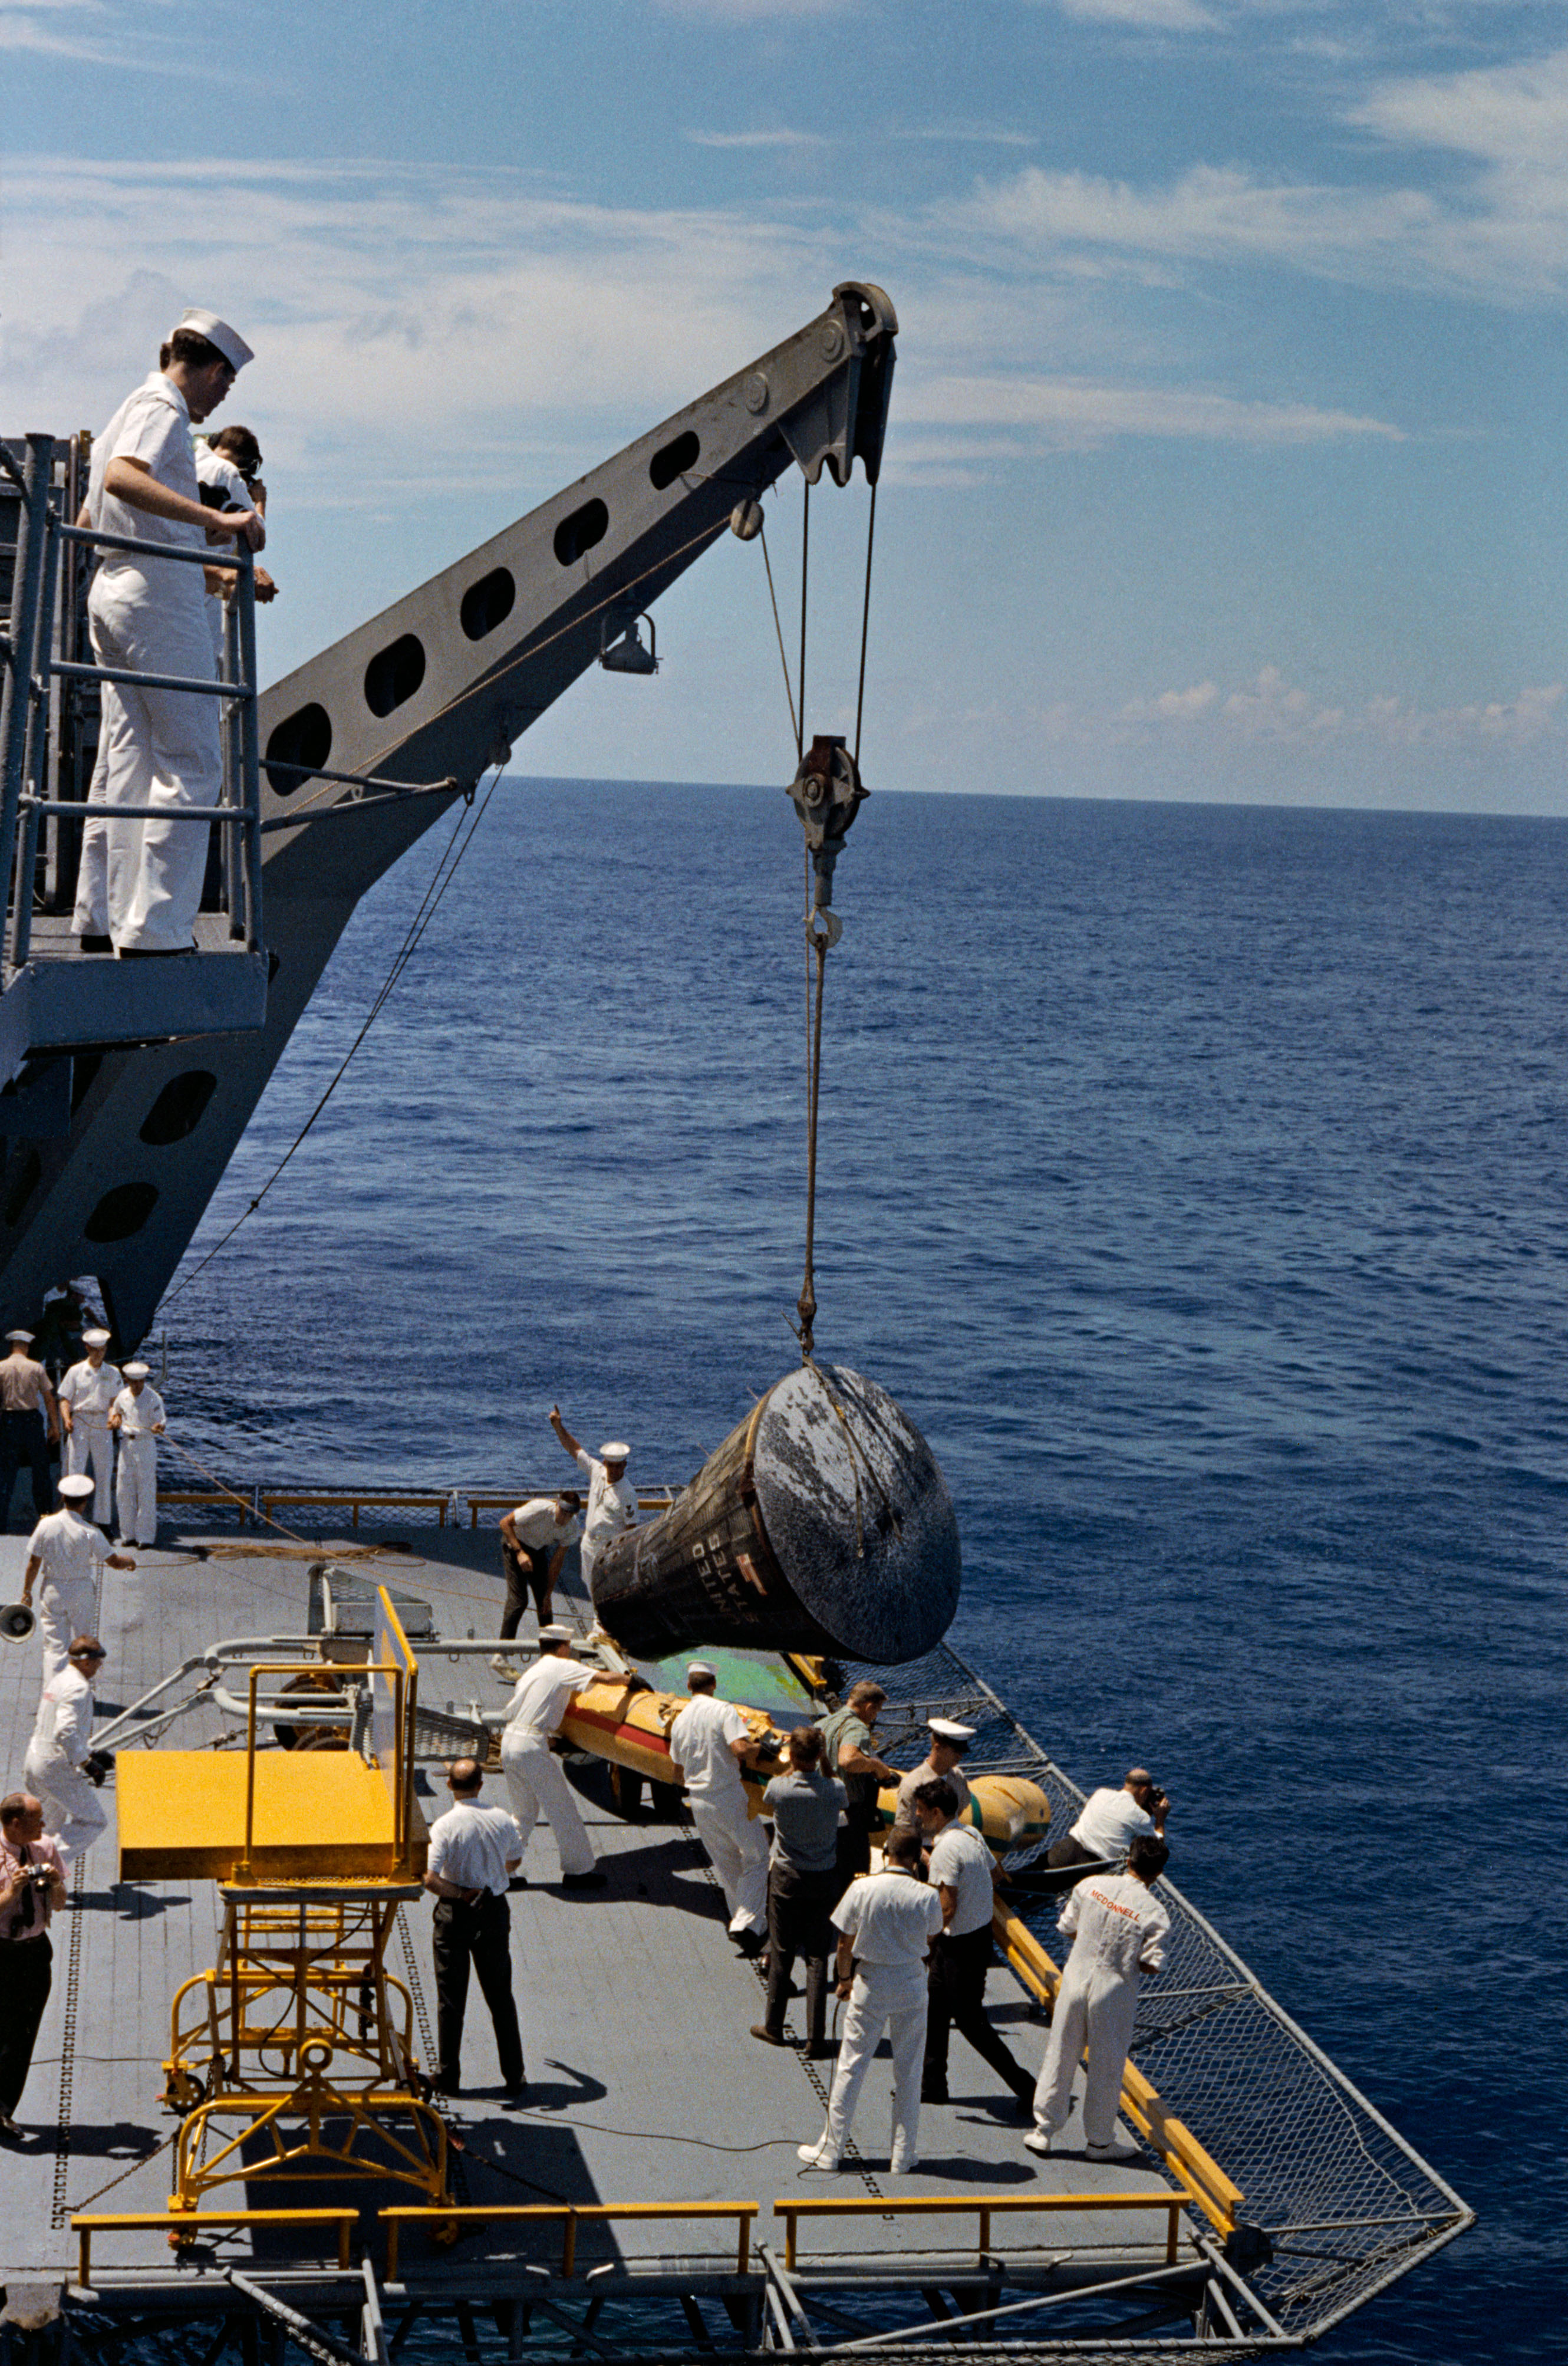 Blackened and scorched following a fiery descent through the atmosphere, Gemini V is lowered by crane onto the deck of the U.S.S. Lake Champlain on 29 August 1965, after the United States' longest manned mission to date. Photo Credit: NASA